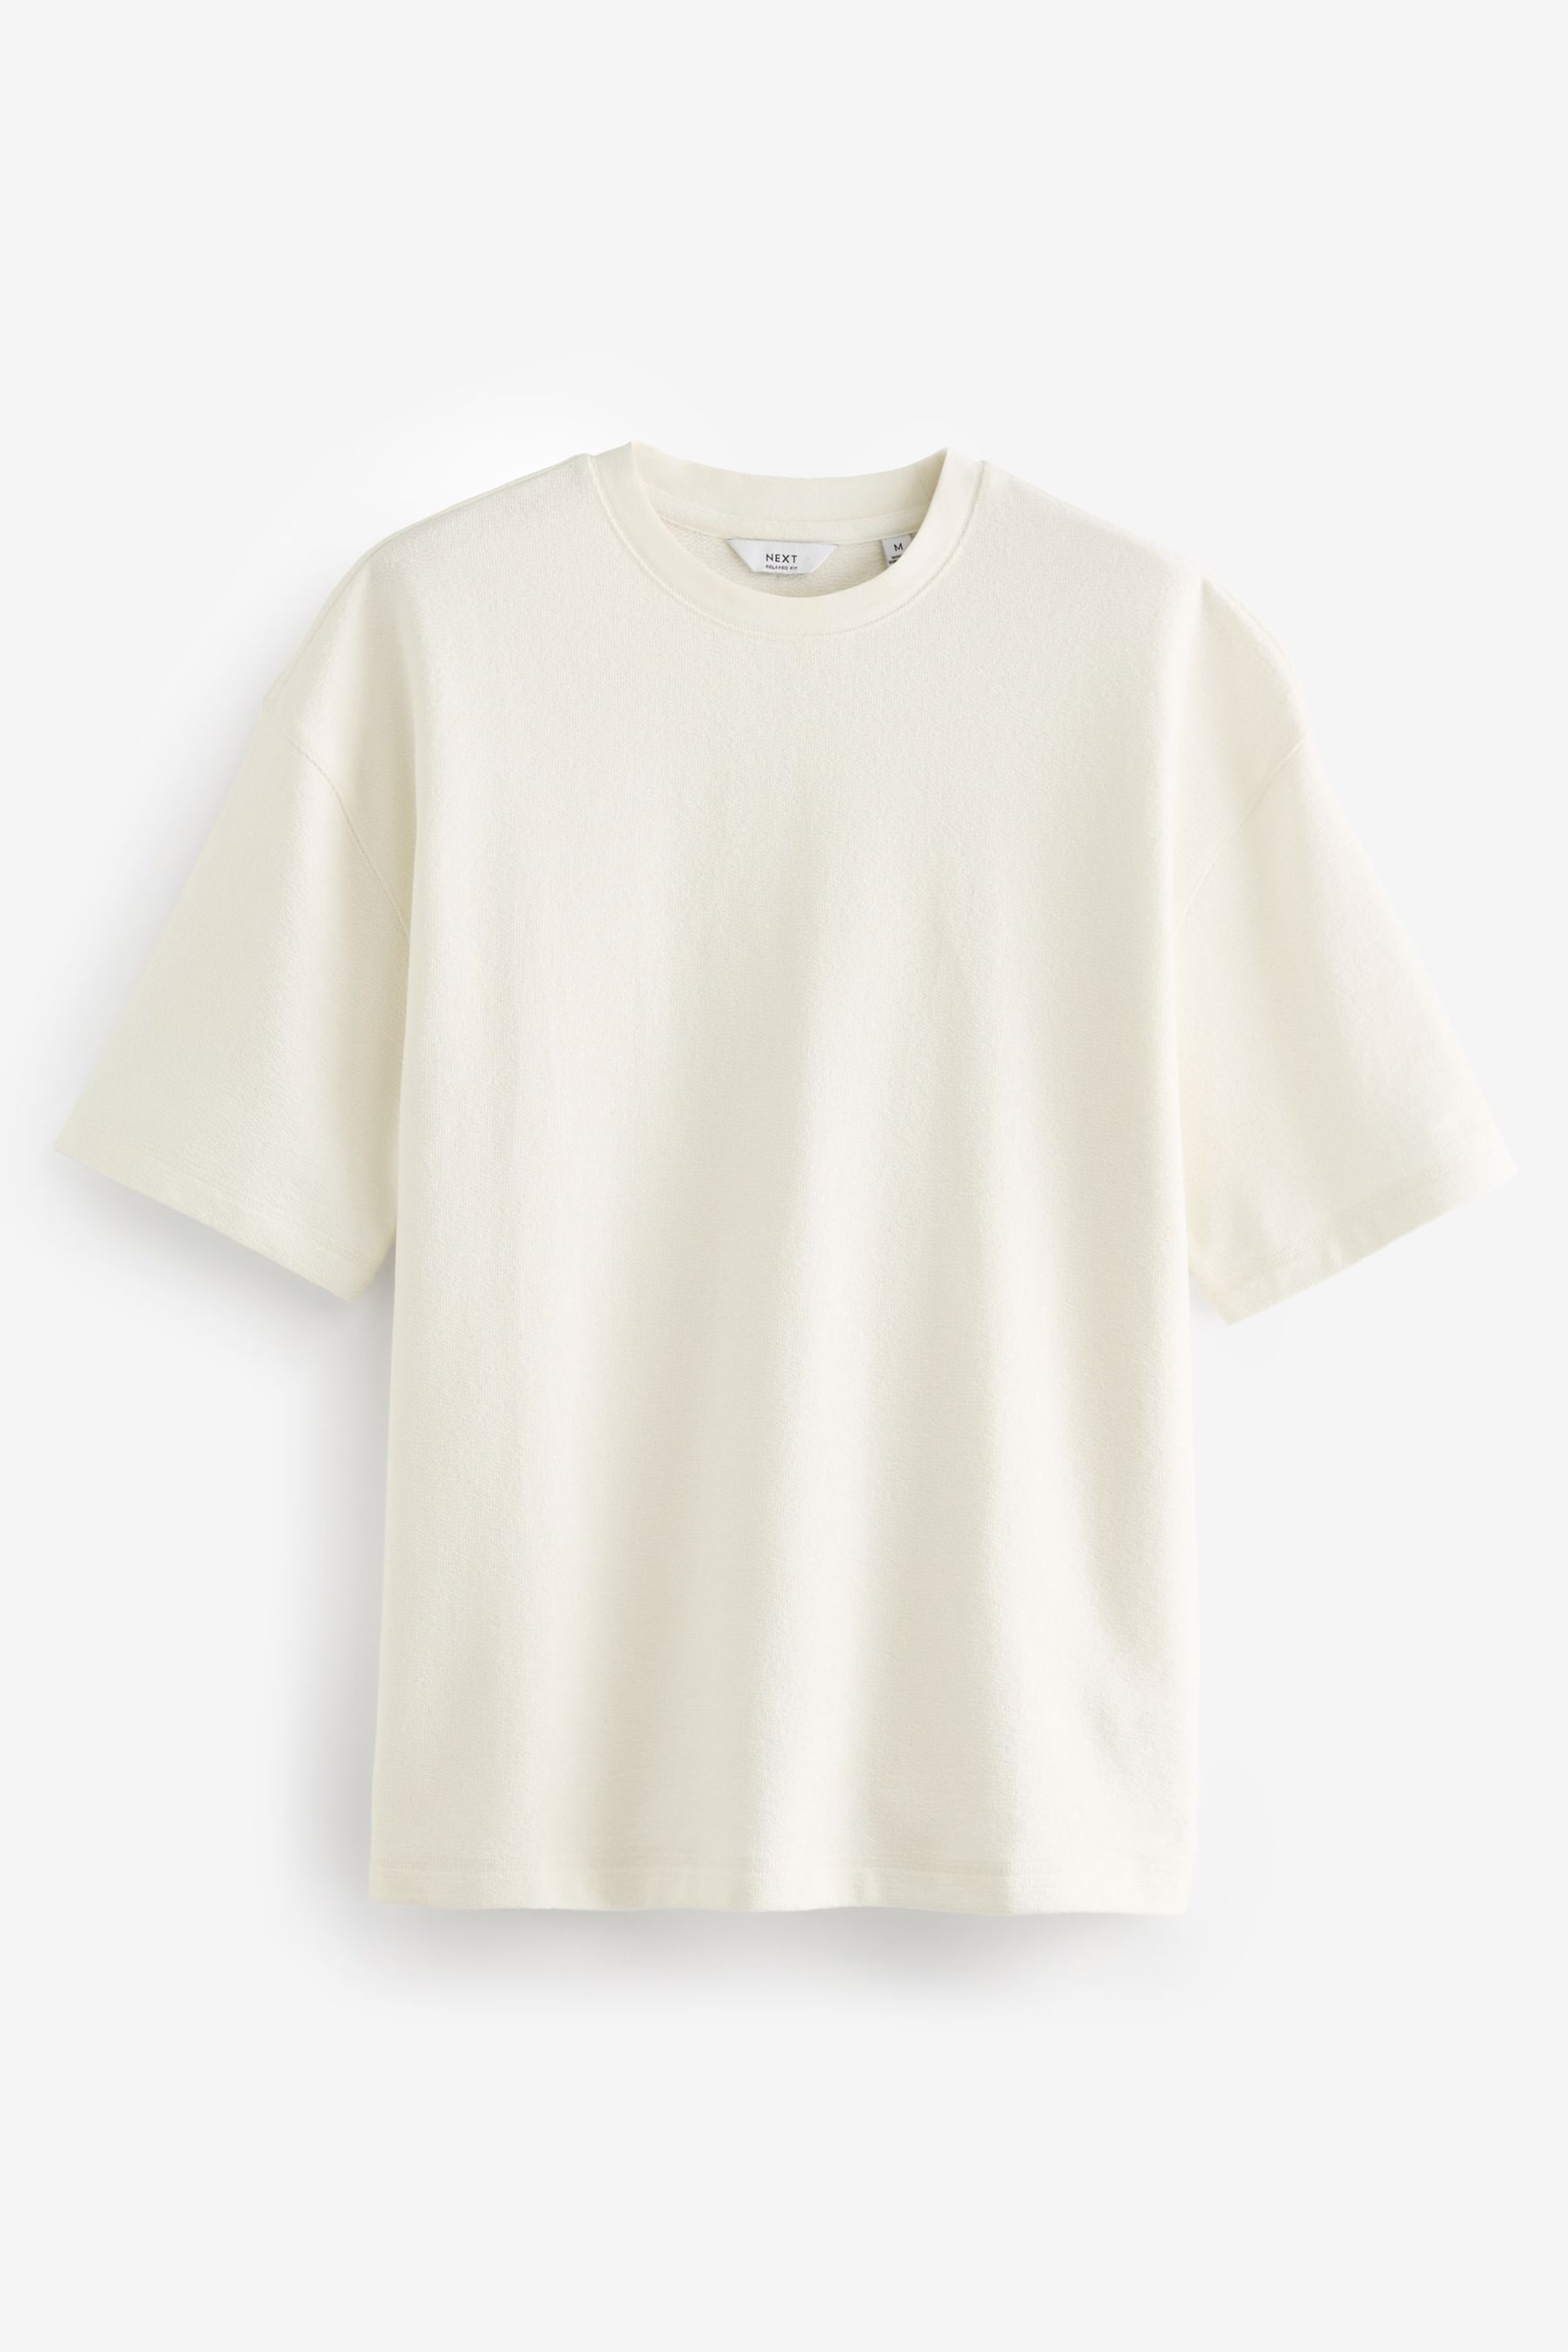 Ecru Texture Relaxed Fit Heavyweight T-Shirt - Image 5 of 7